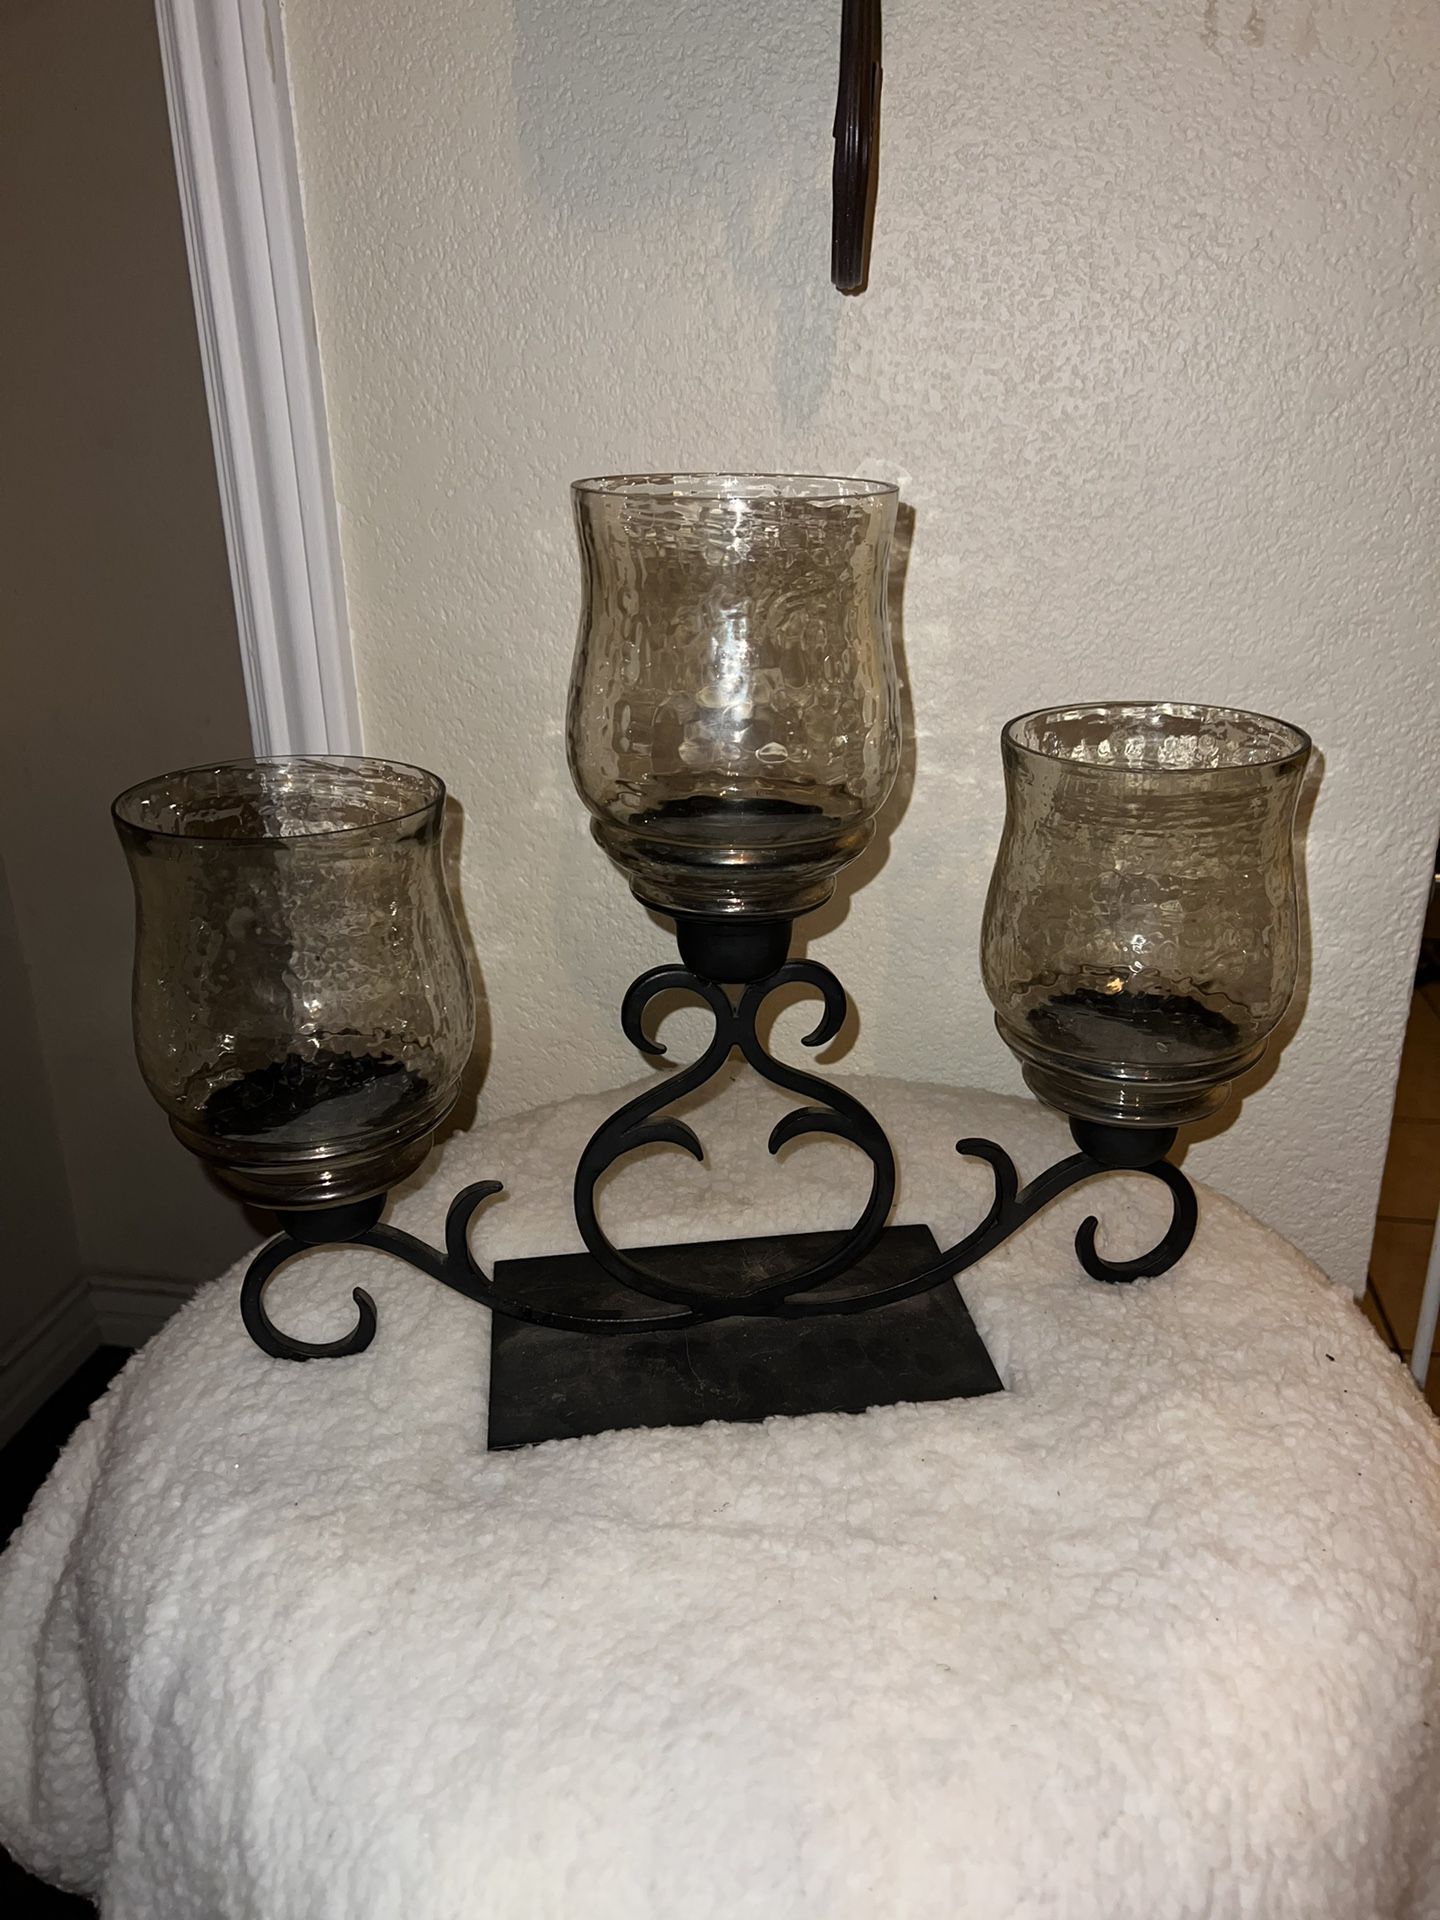 3 CANDLE HOLDER DECOR FROM HOBBY LOBBY 